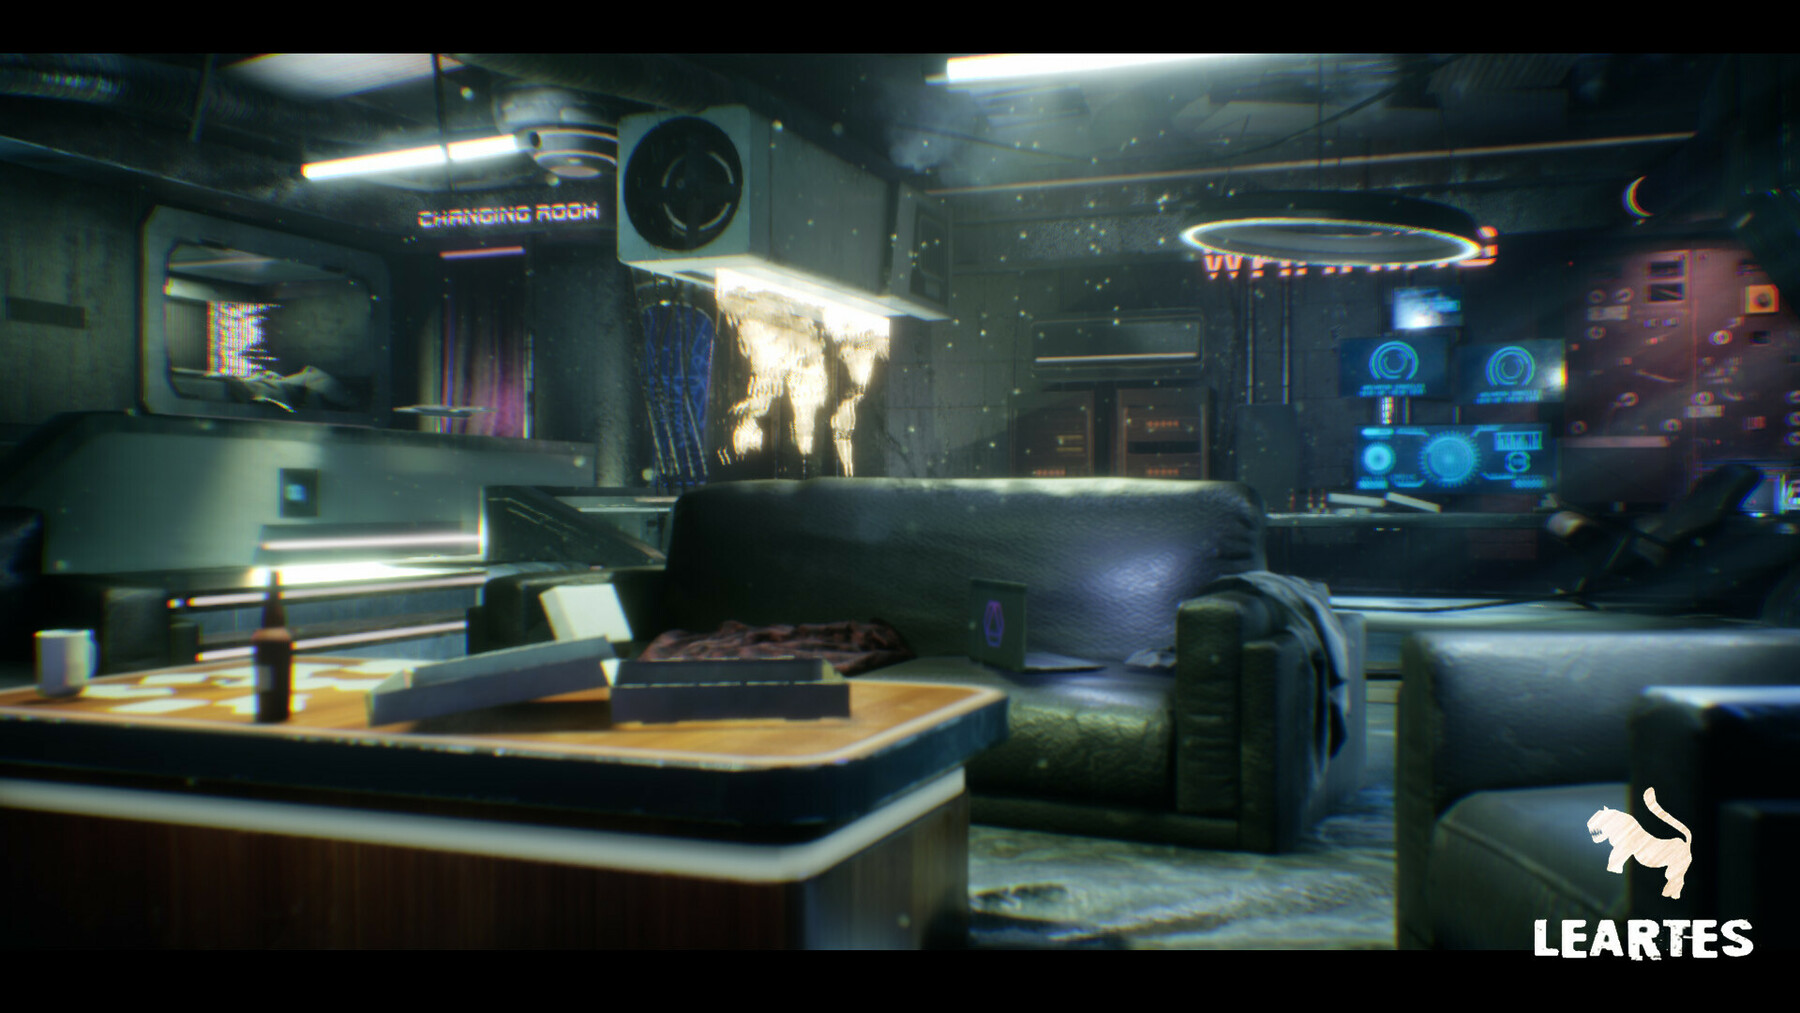 ArtStation - Cyberpunk Interior Bundle (3 products in 1) | Game Assets